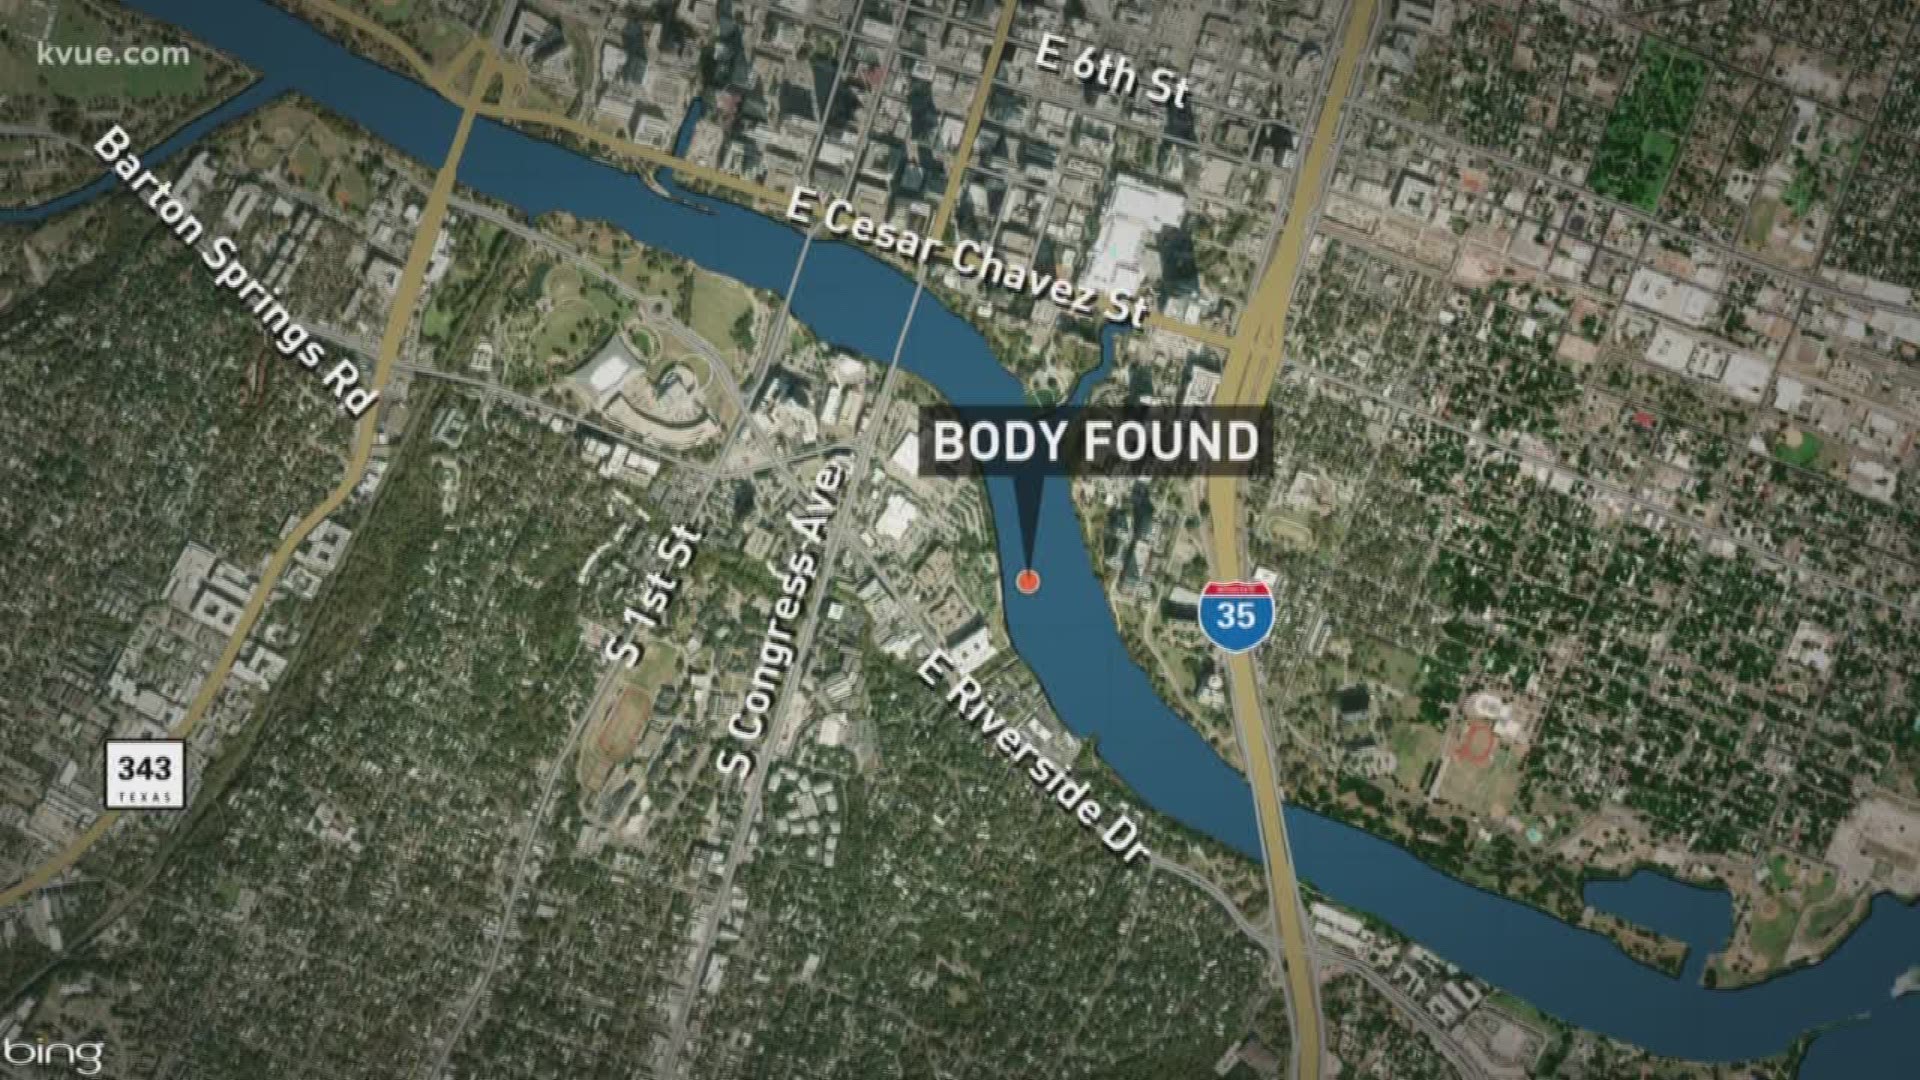 Man's body found floating in Lady Bird Lake, officials say